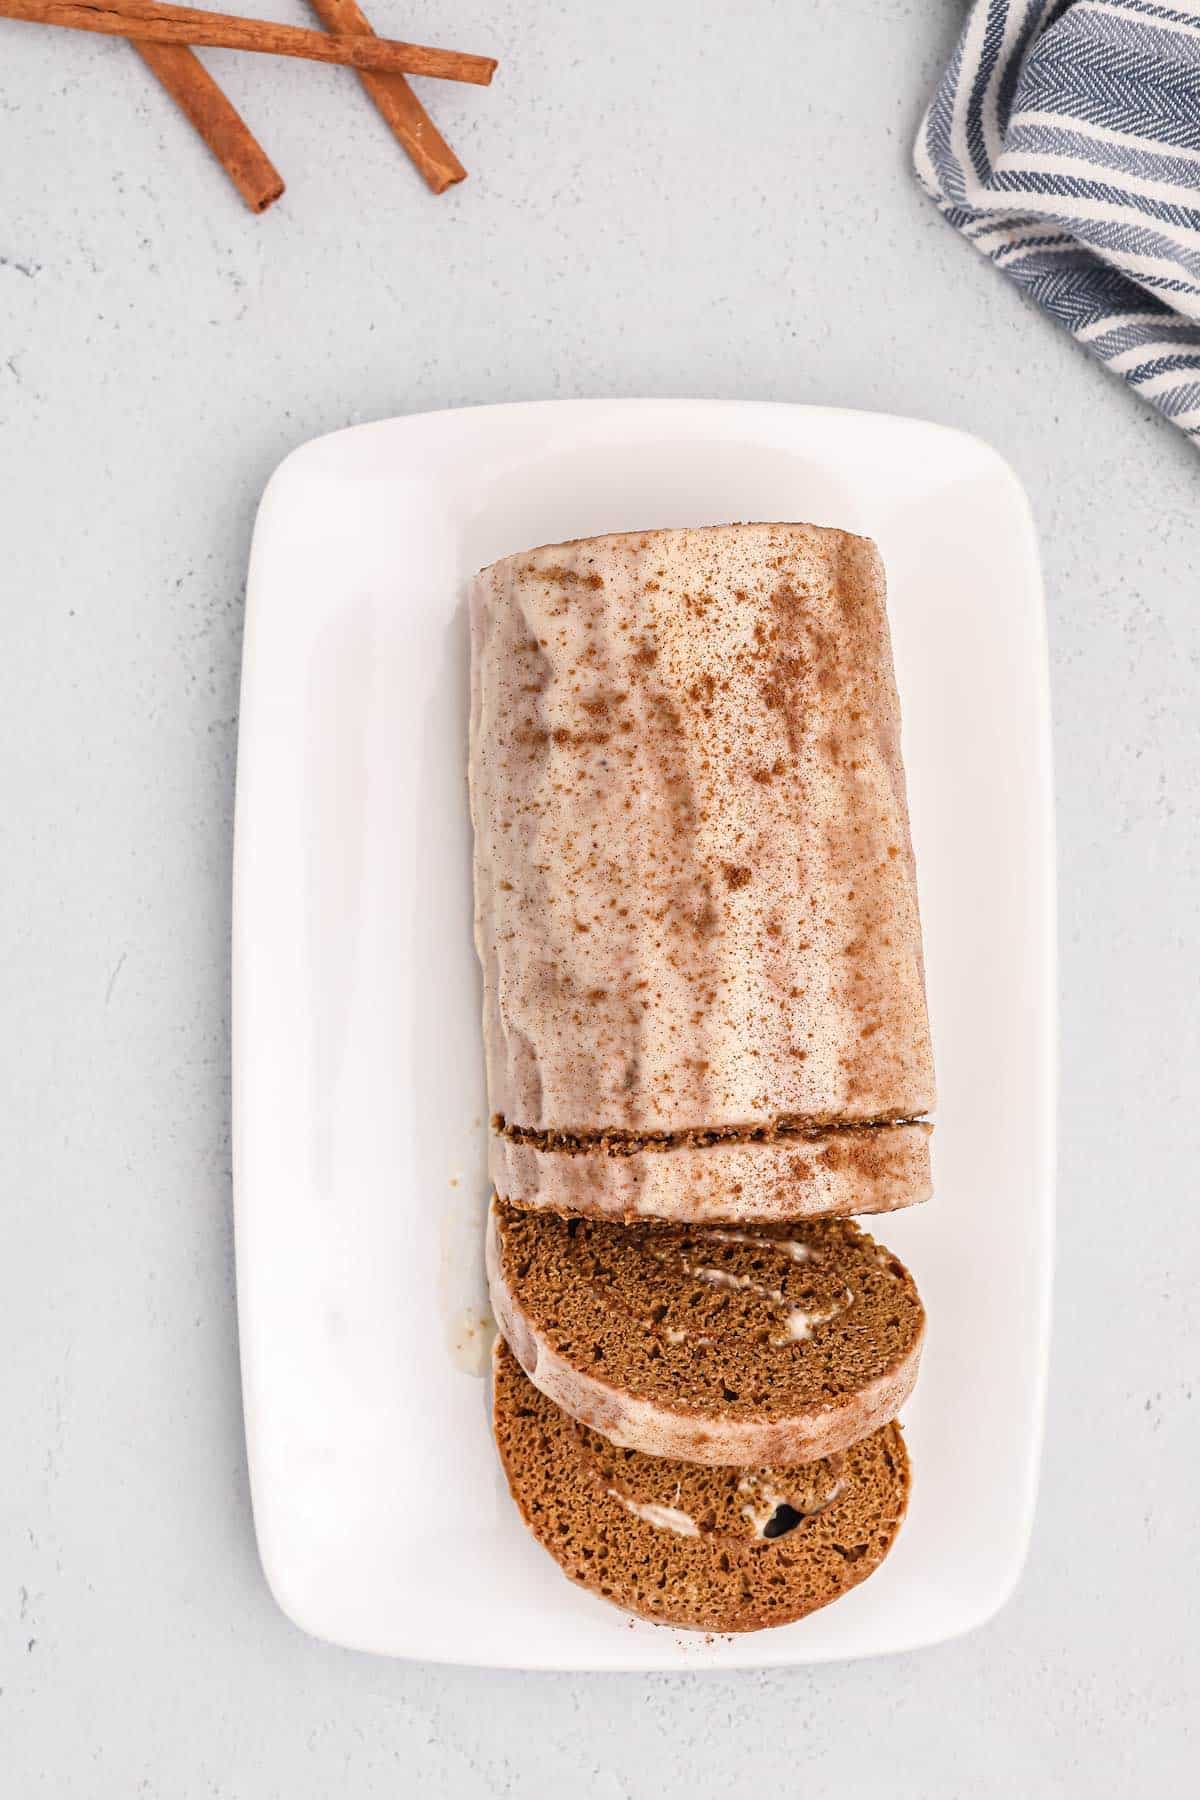 A sliced and rolled log type cake made with gingerbread spices.